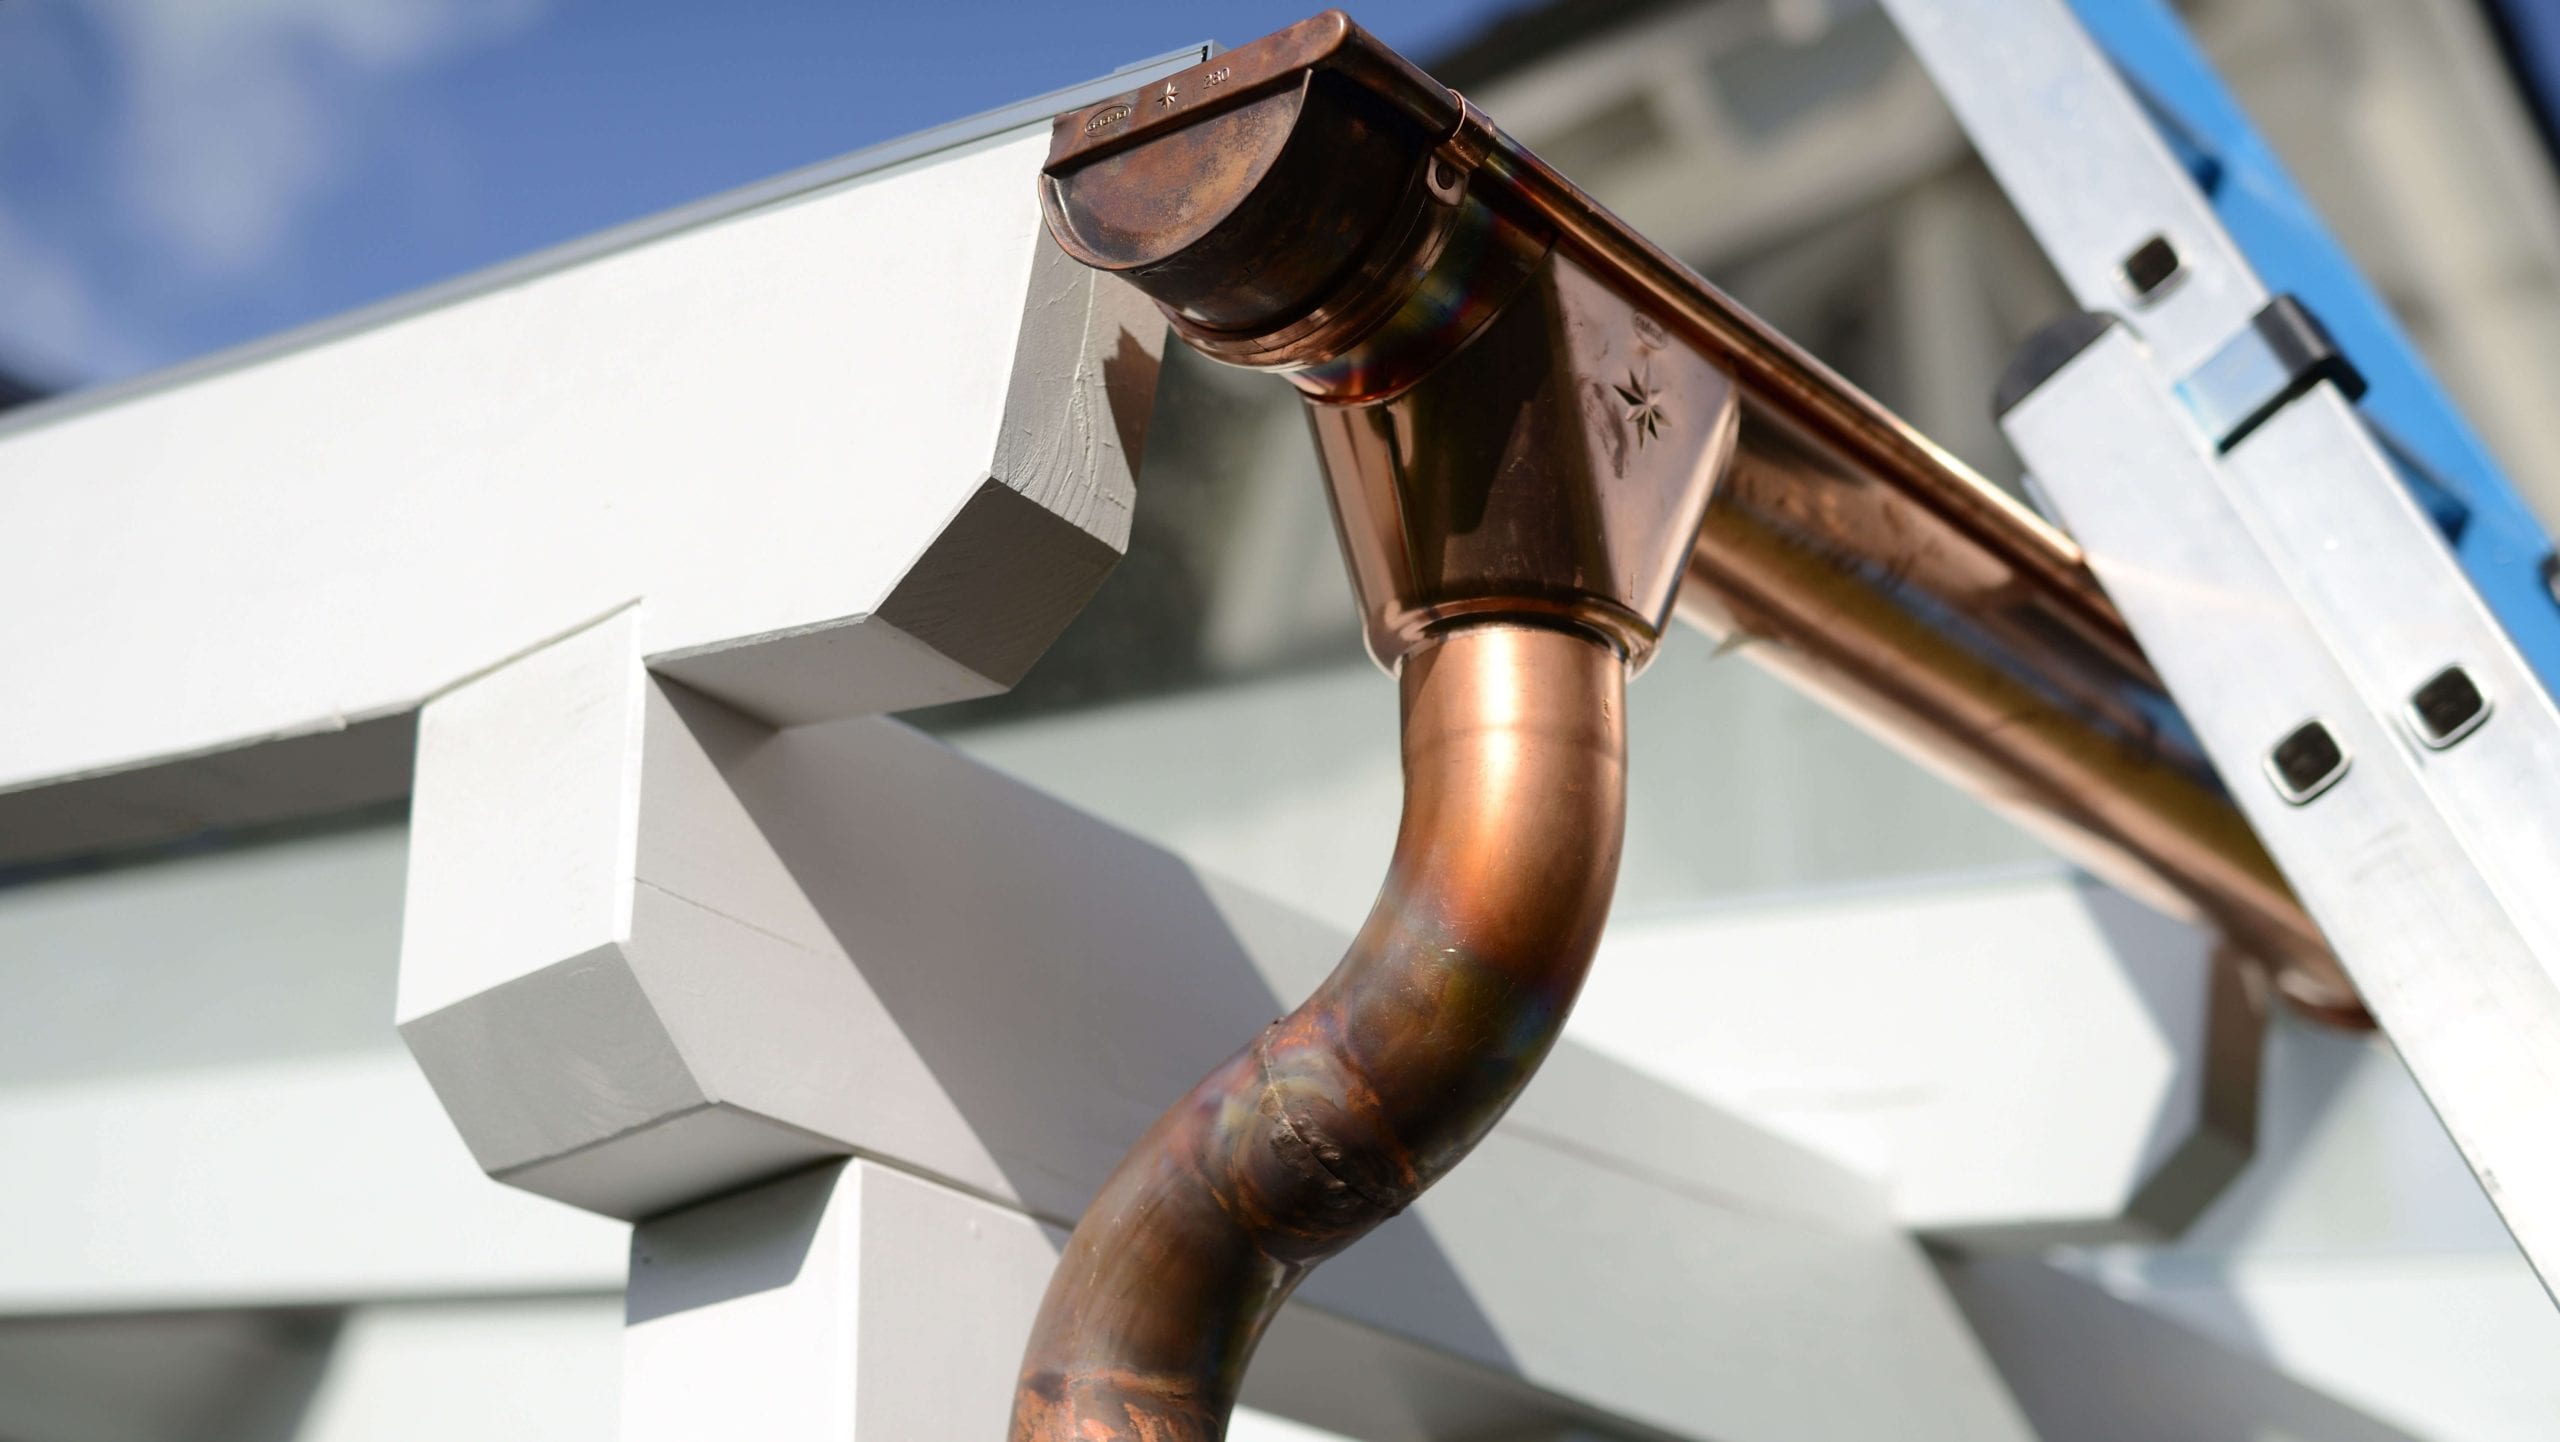 Make your property stand out with copper gutters. Contact for gutter installation in Lakeland